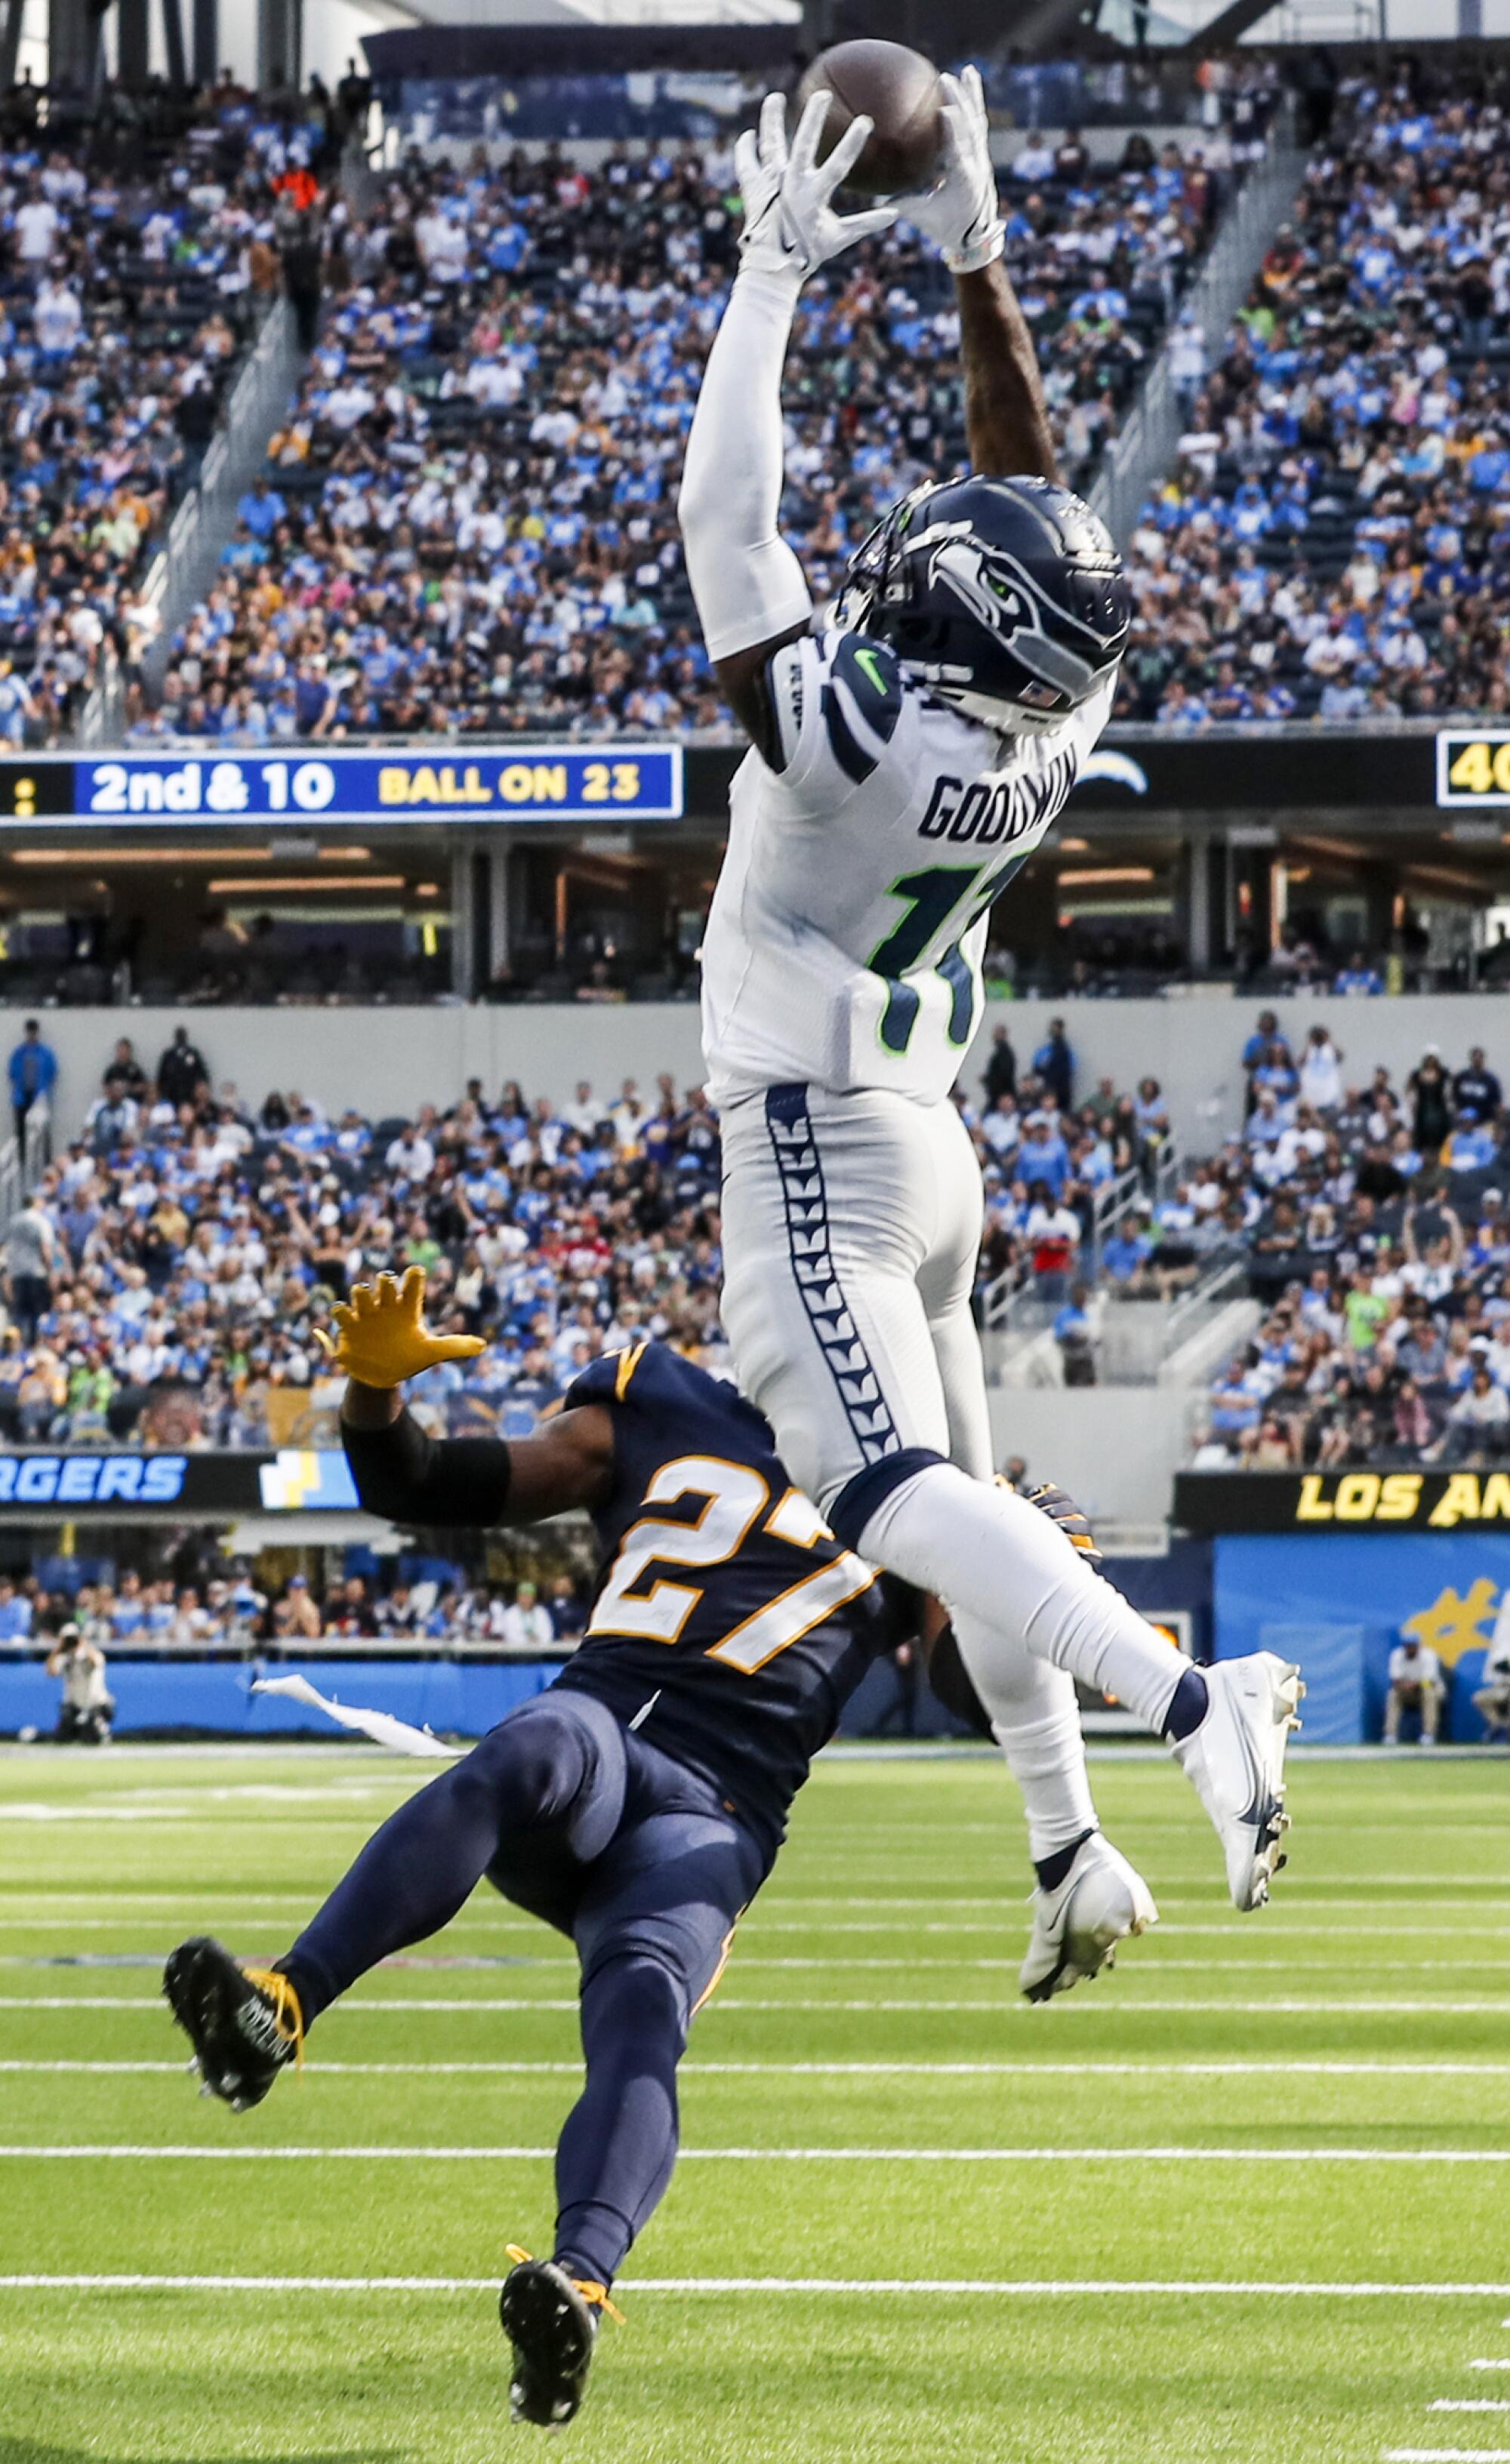 Seahawks wide receiver Marquise Goodwin reaches over Chargers cornerback J.C. Jackson for a touchdown.